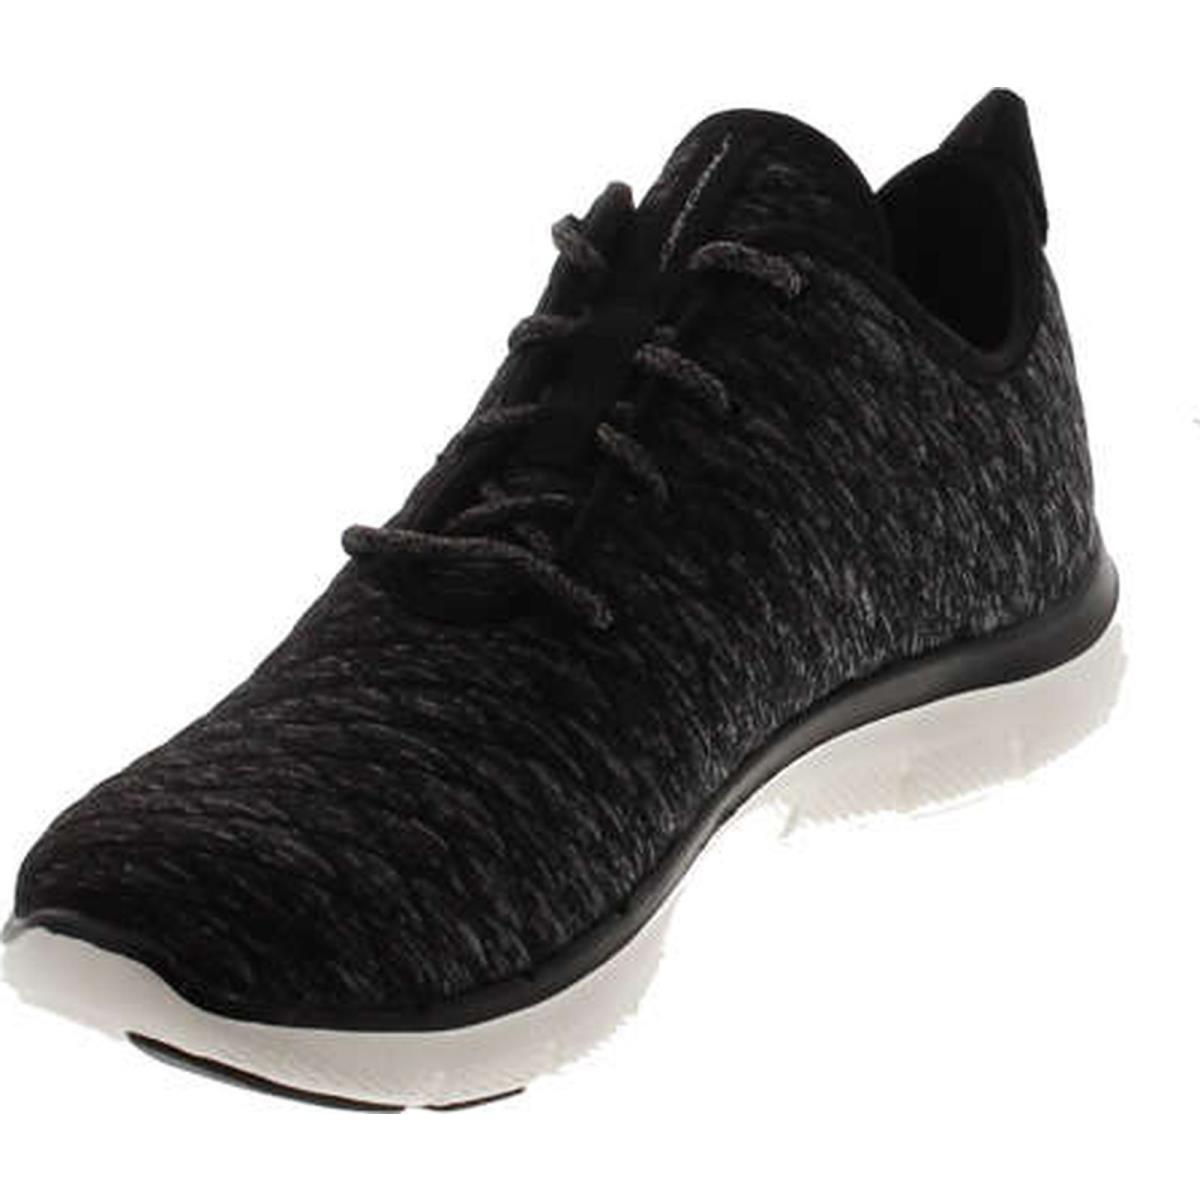 Skechers Flex Appeal 2.0 First Impressions Women Round Toe Synthetic Sneakers - Black/White